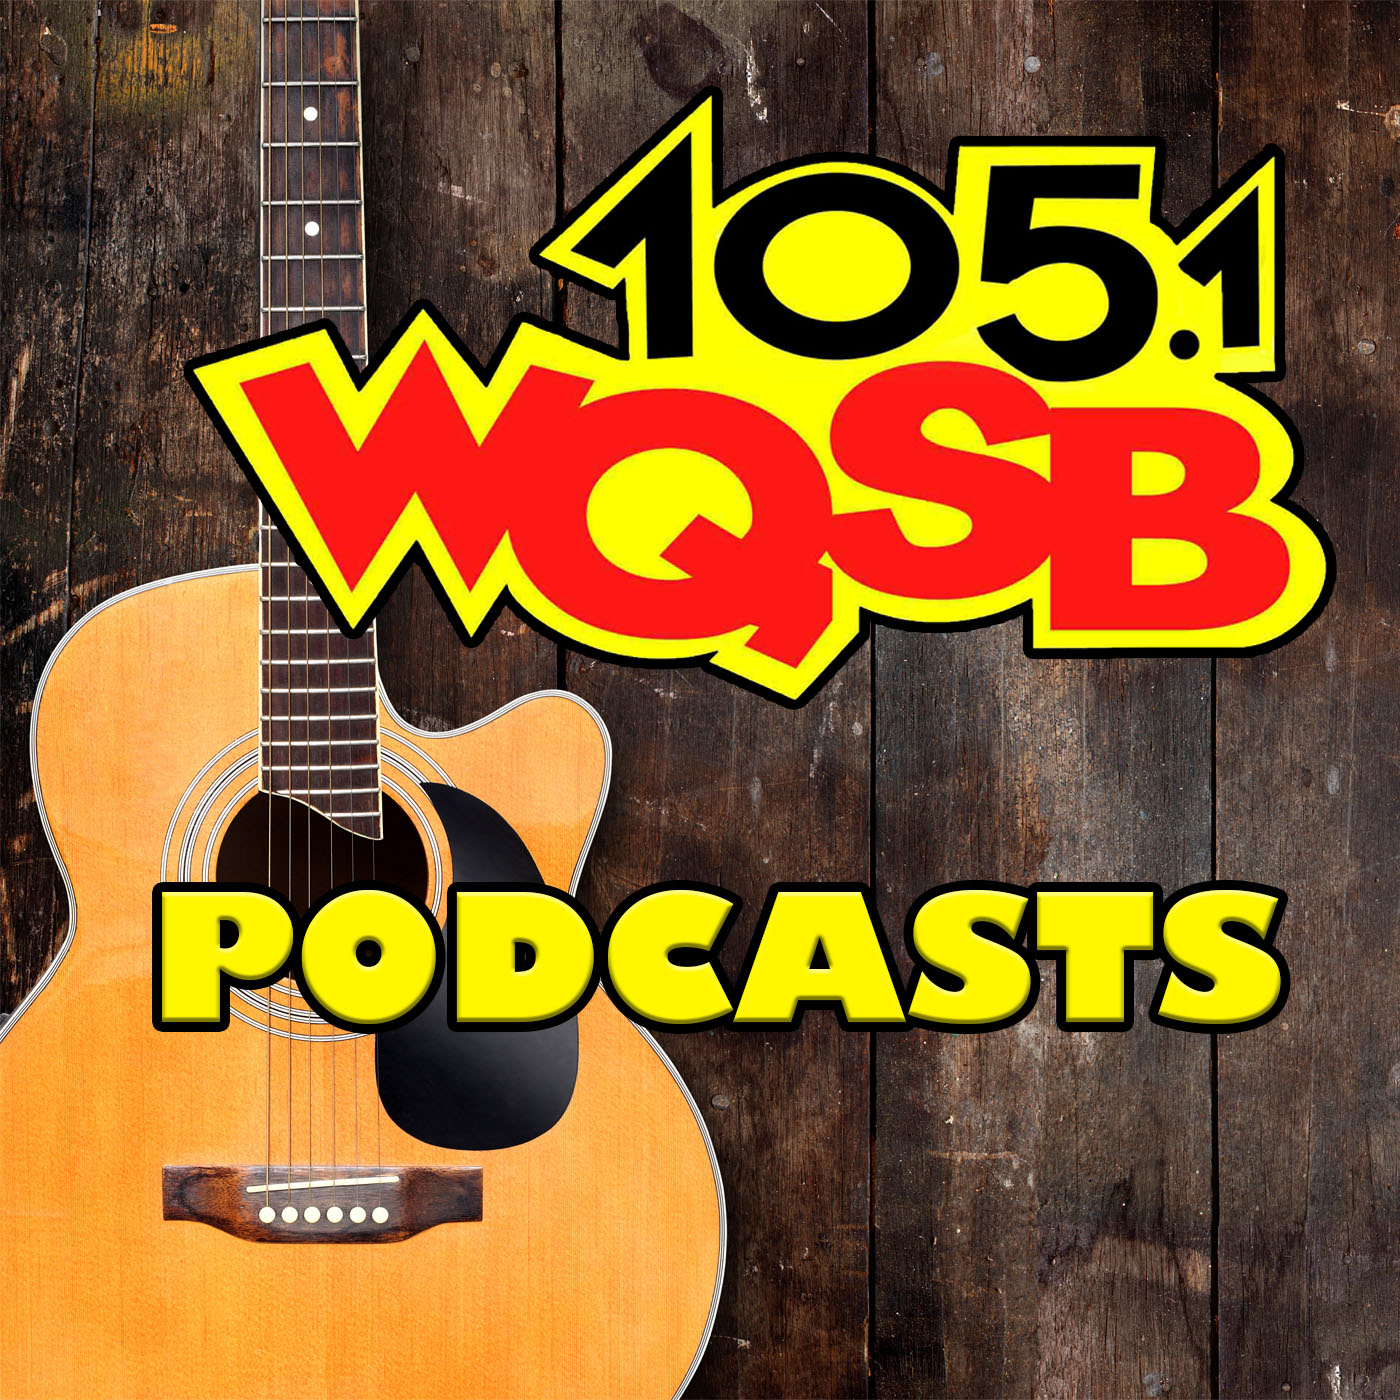 WQSB Podcasts